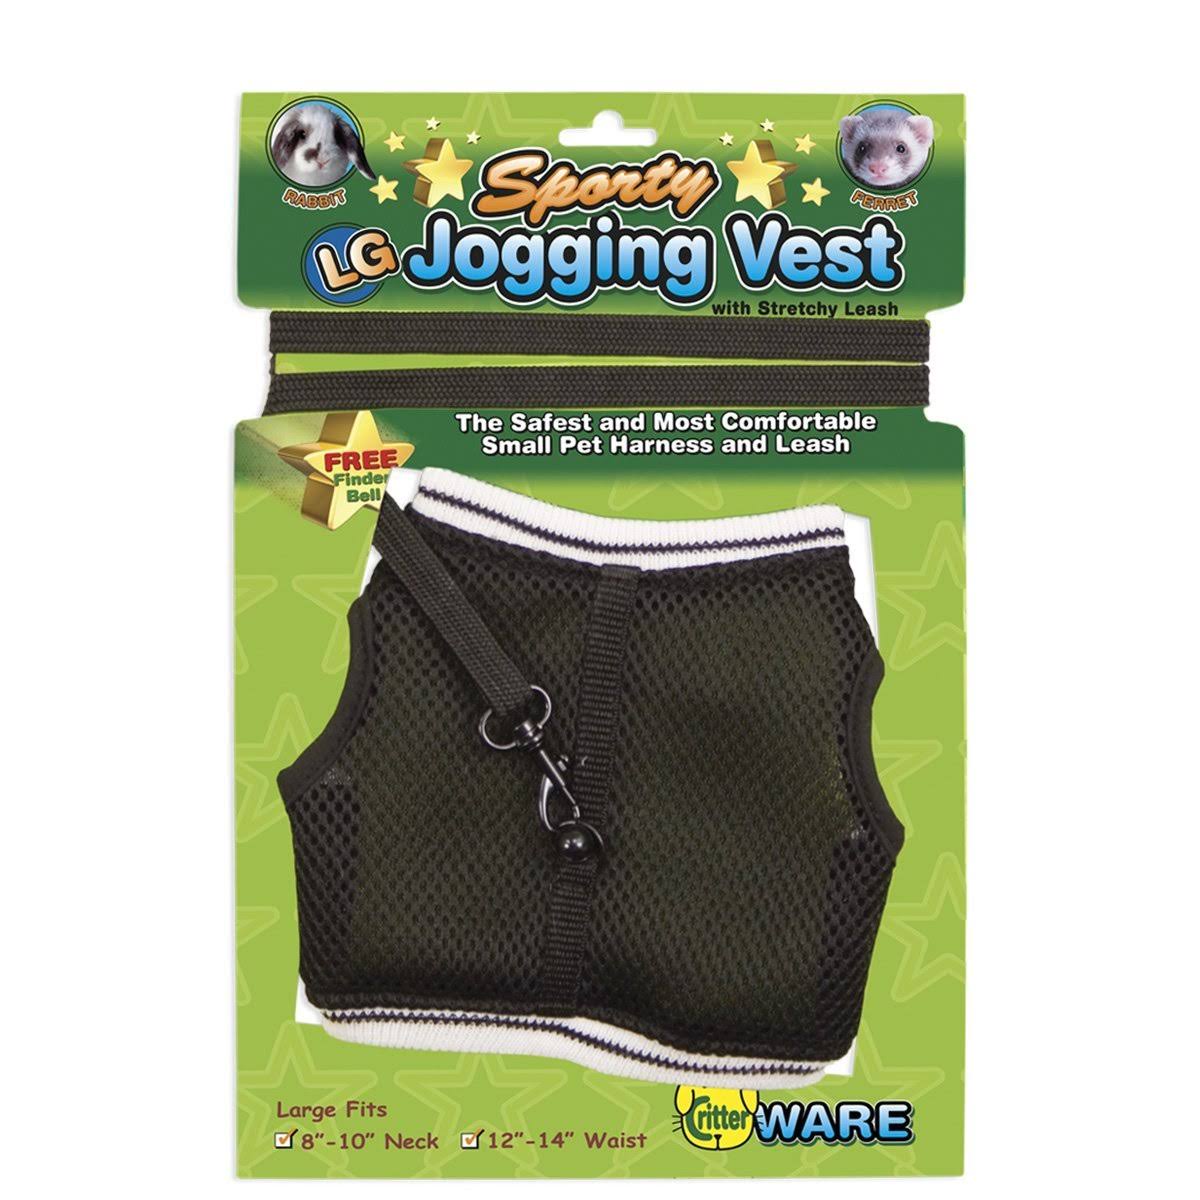 Ware Manufacturing Nylon Walk-N-Vest Pet Harness and Leash